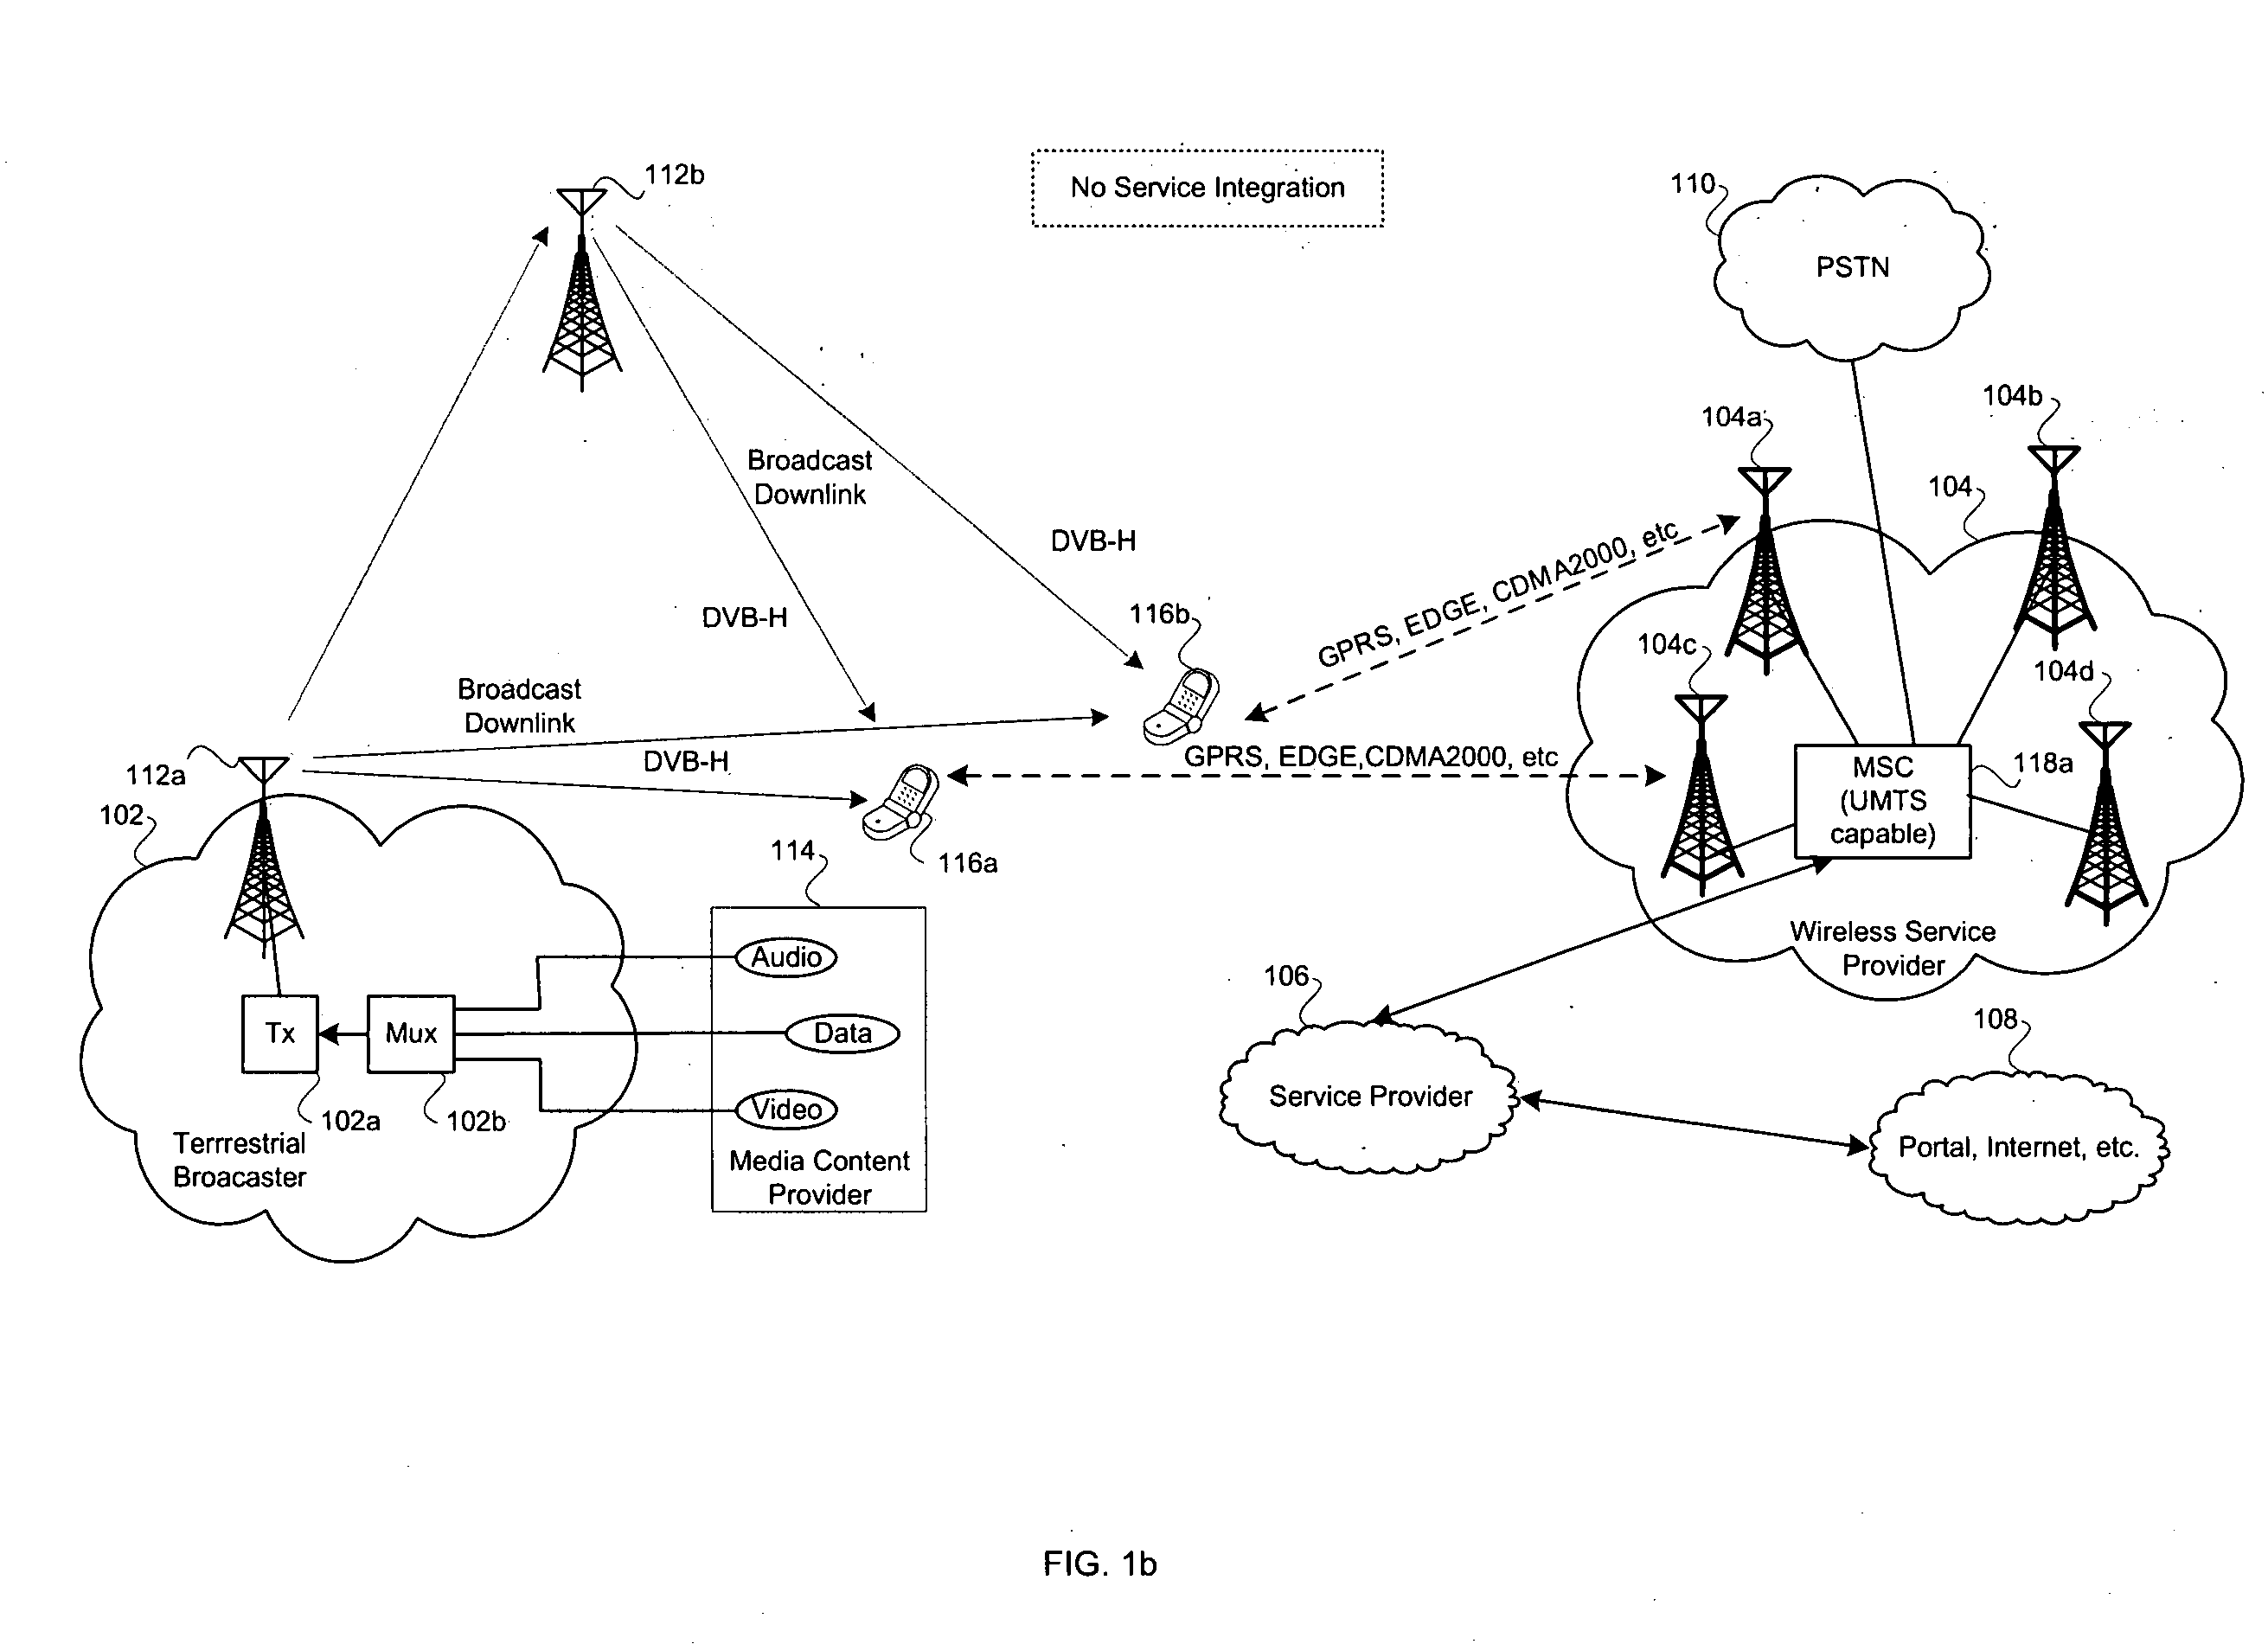 Method and system for joint broadcast receiving and cellular communication at mobile terminal or device without service control